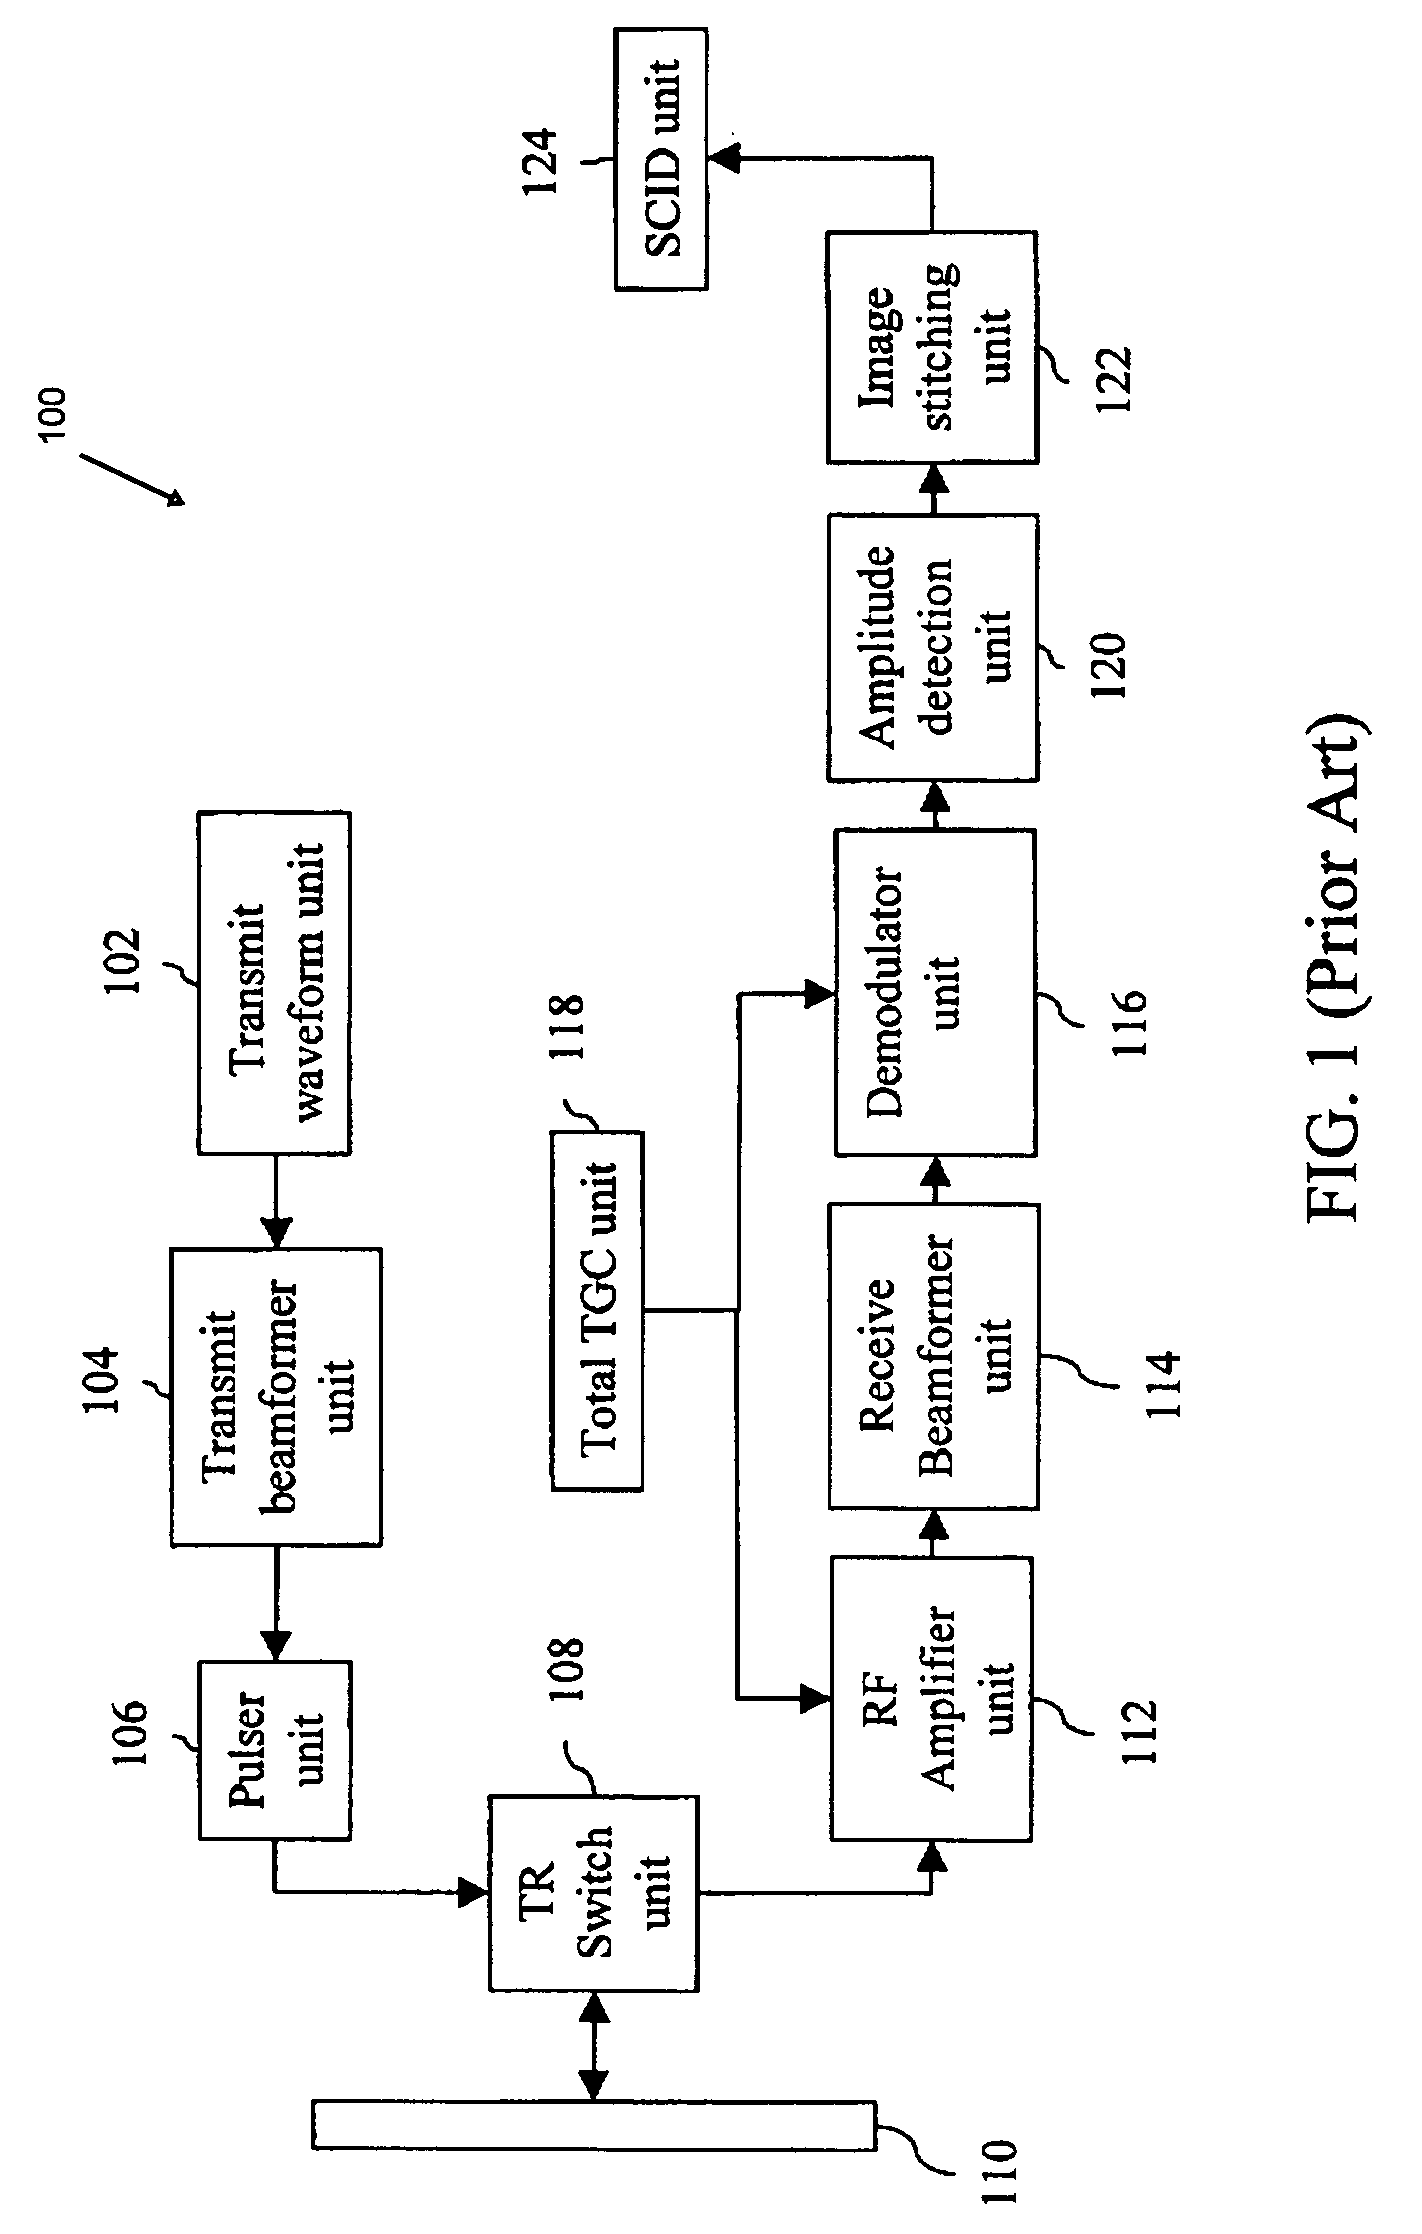 Method and system of controlling ultrasound systems